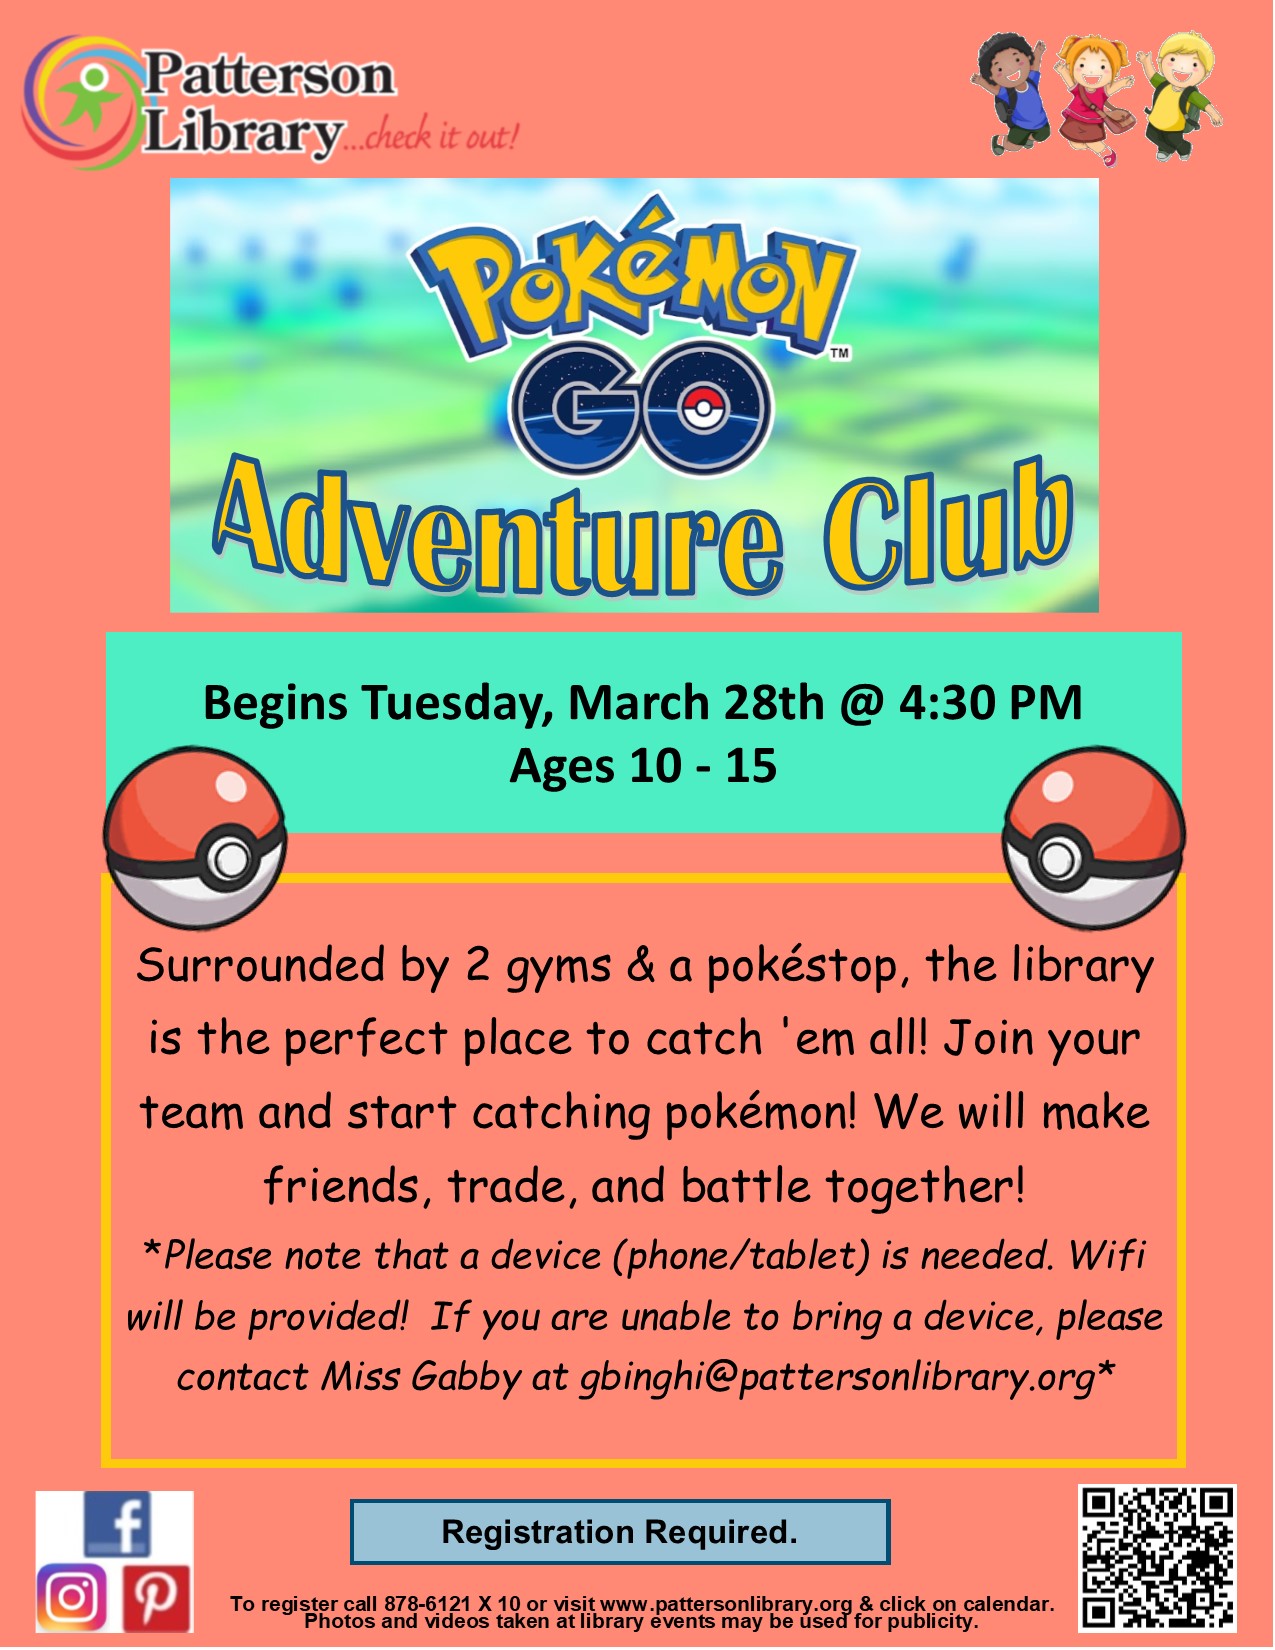 Pokémon Go Adventure Club. Surrounded by 2 gyms & a pokéstop, the library is the perfect place to catch 'em all! Join your team and start catching pokémon! We will make friends, trade, and battle together! *Please note that a device (phone/tablet) is needed. Wifi will be provided! If you are unable to bring a device, please contact Miss Gabby at gbinghi@pattersonlibrary.org*